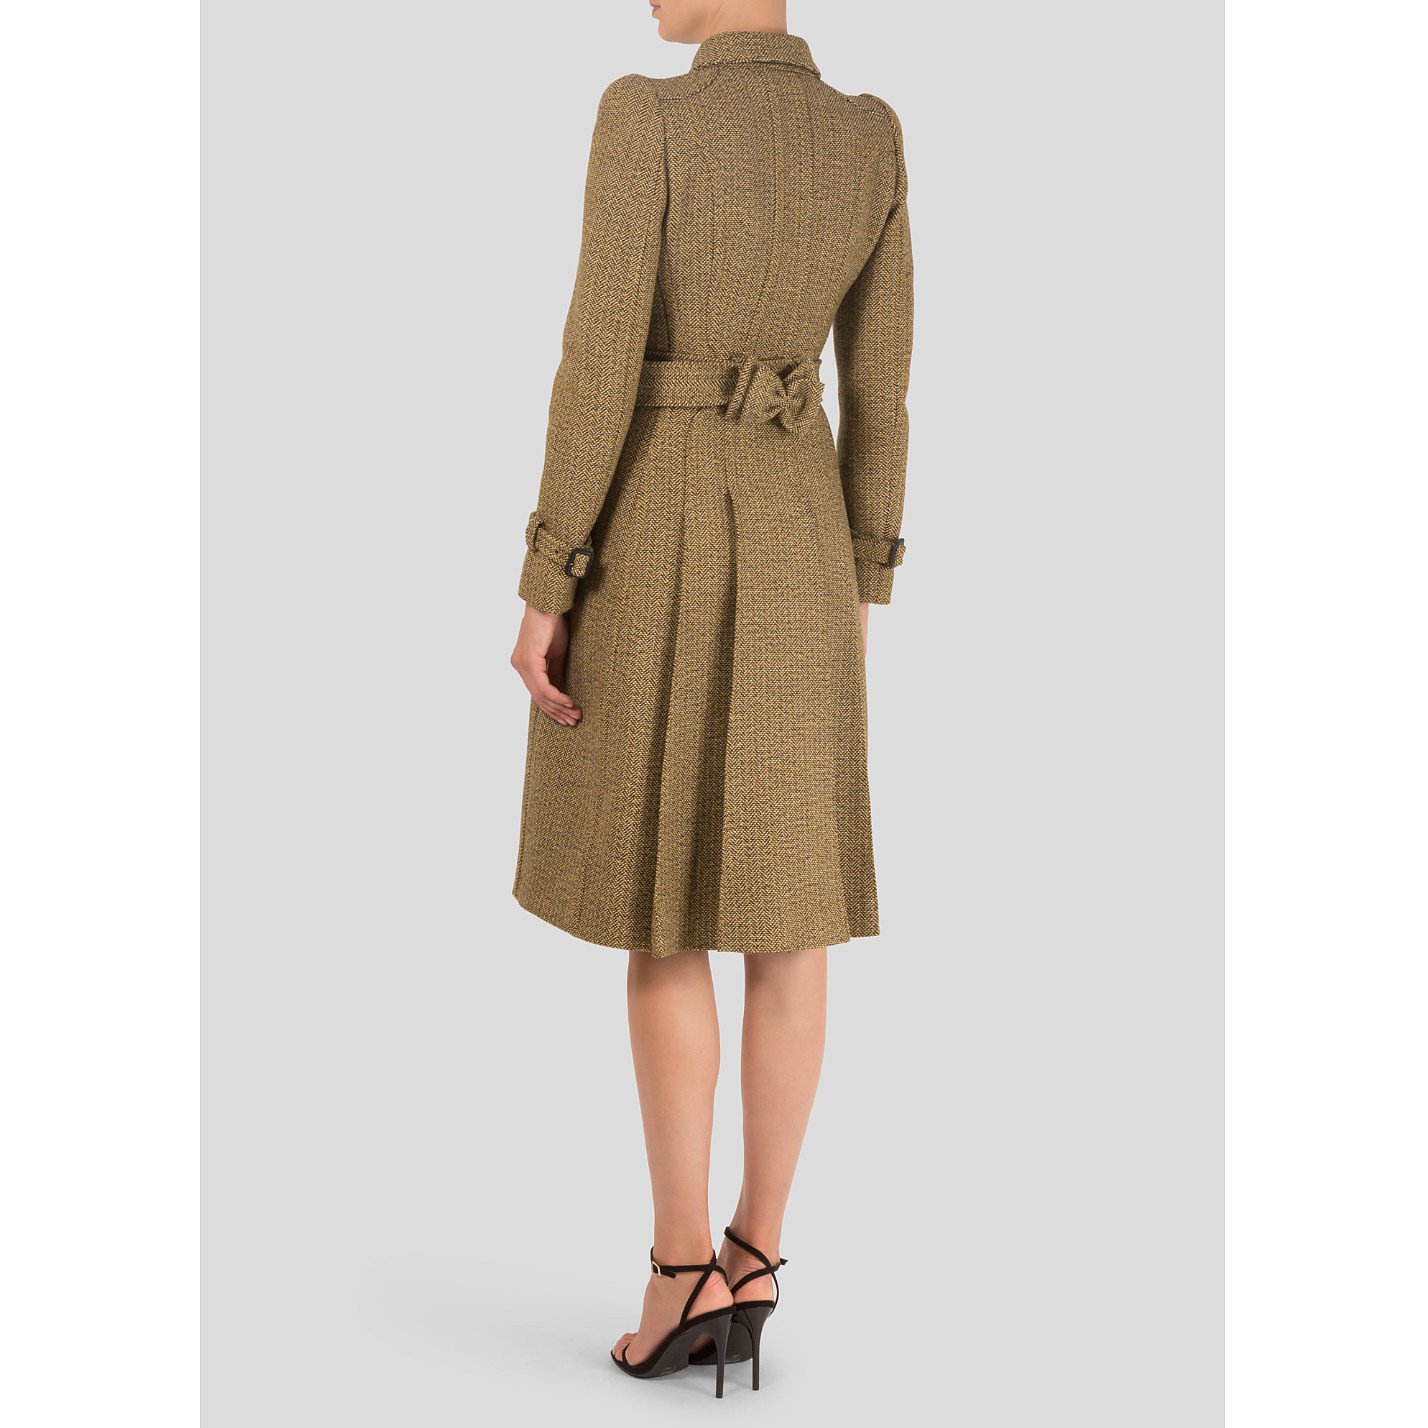 Rent or Buy Burberry Wool-Tweed Trench Coat from MyWardrobeHQ.com